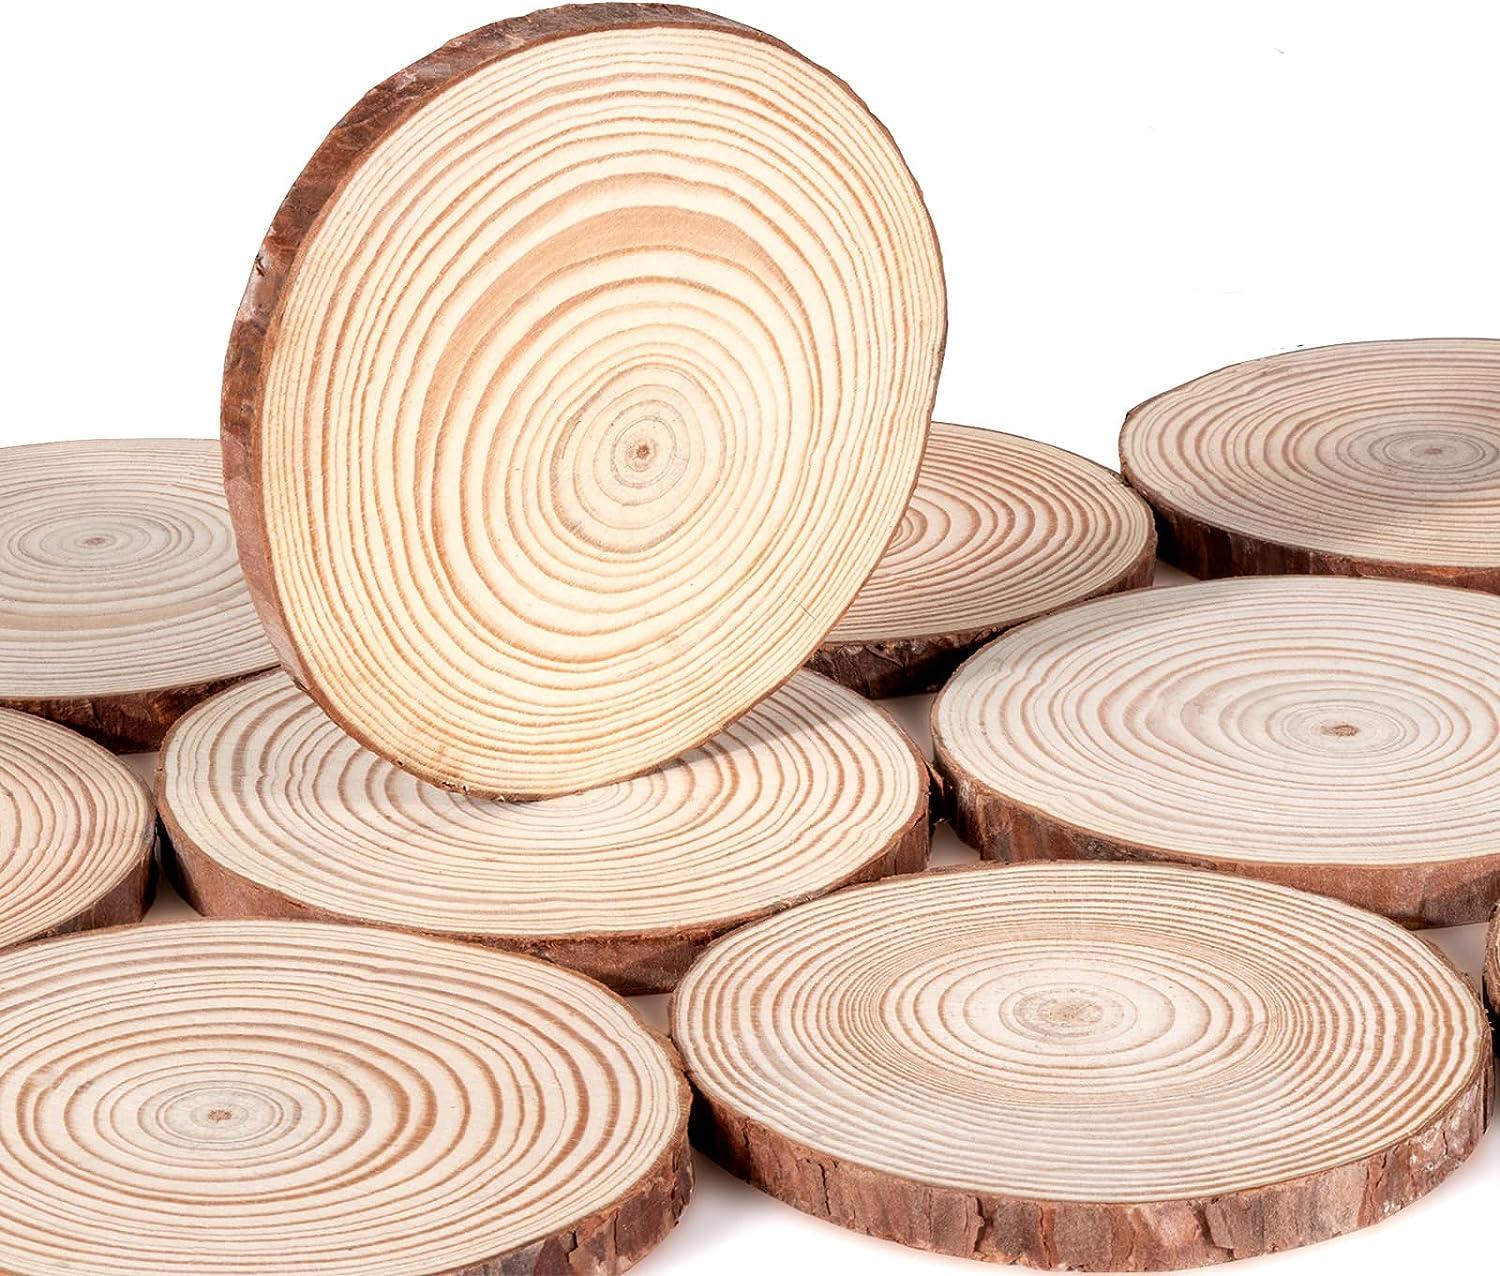 Lemonfilter Natural Wood Slices 16 Pcs 4.3-4.7 Inches Craft Wood Kit Wooden  Circles Unfinished Log Wooden Rounds for Arts Crafts Wedding Christmas DIY  Projects 11-12CM